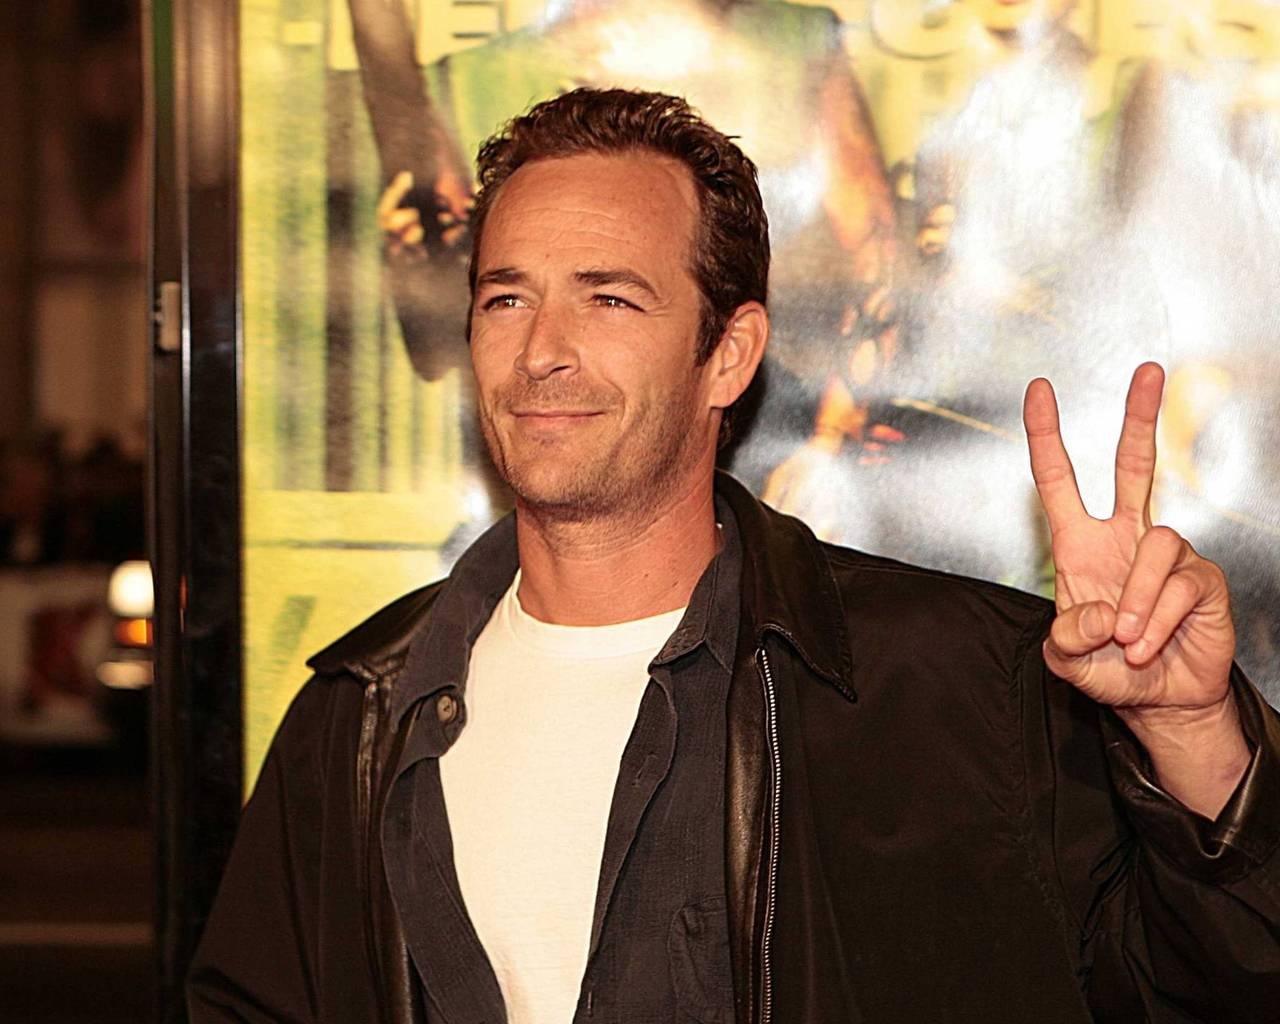 Luke Perry for 1280 x 1024 resolution